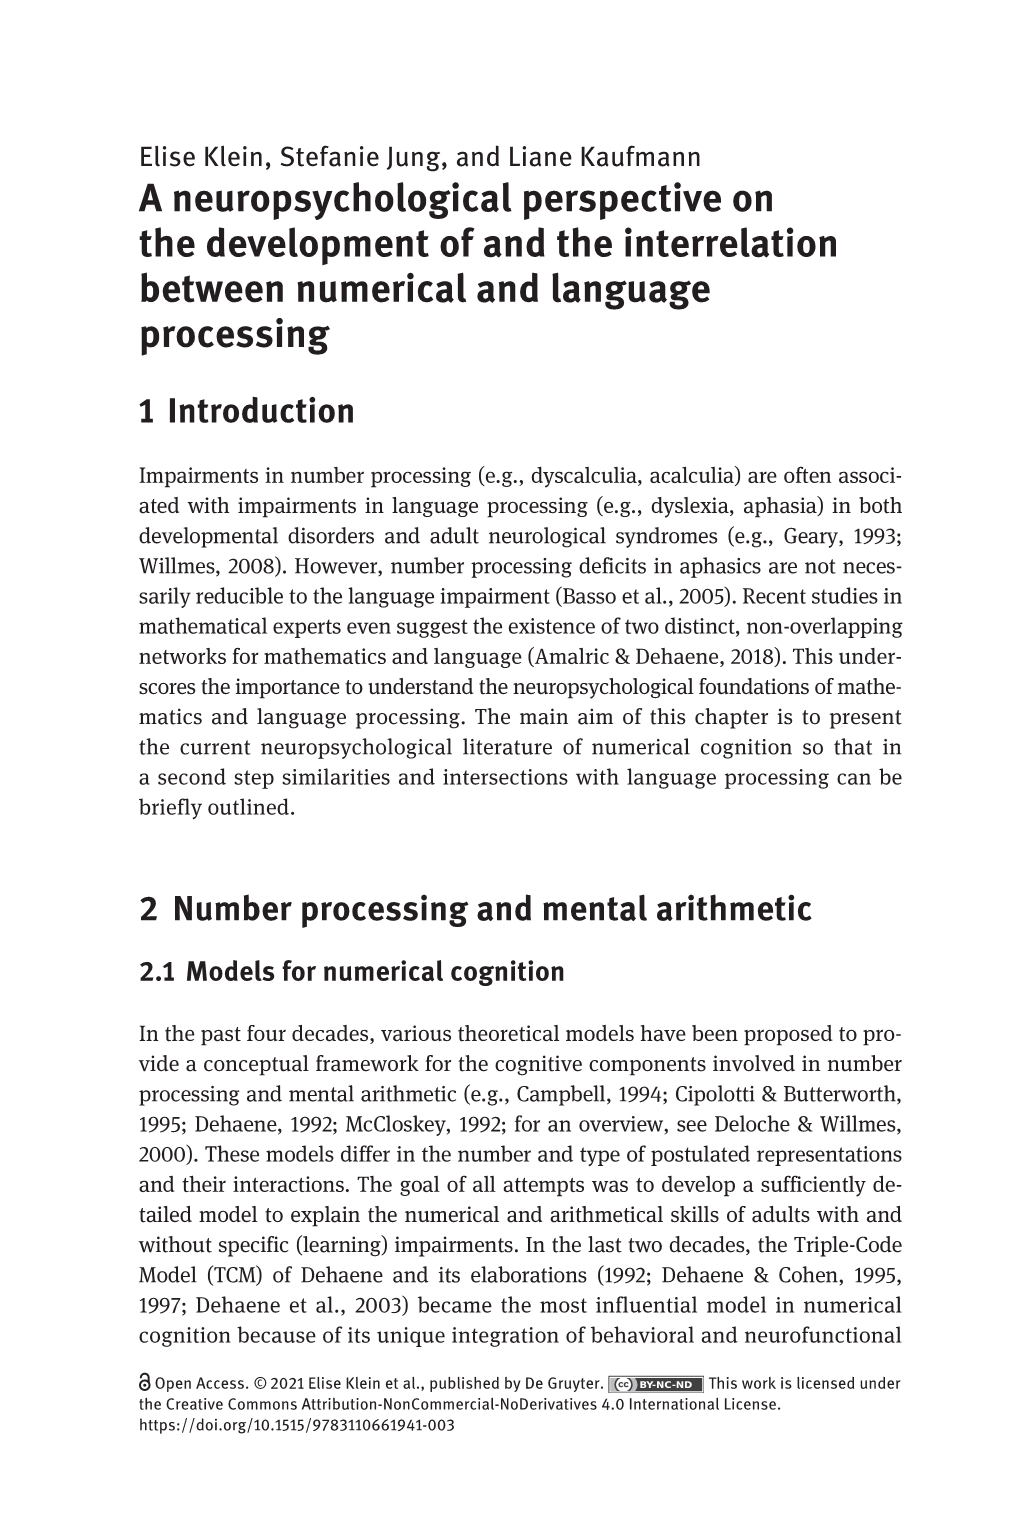 A Neuropsychological Perspective on the Development of and the Interrelation Between Numerical and Language Processing